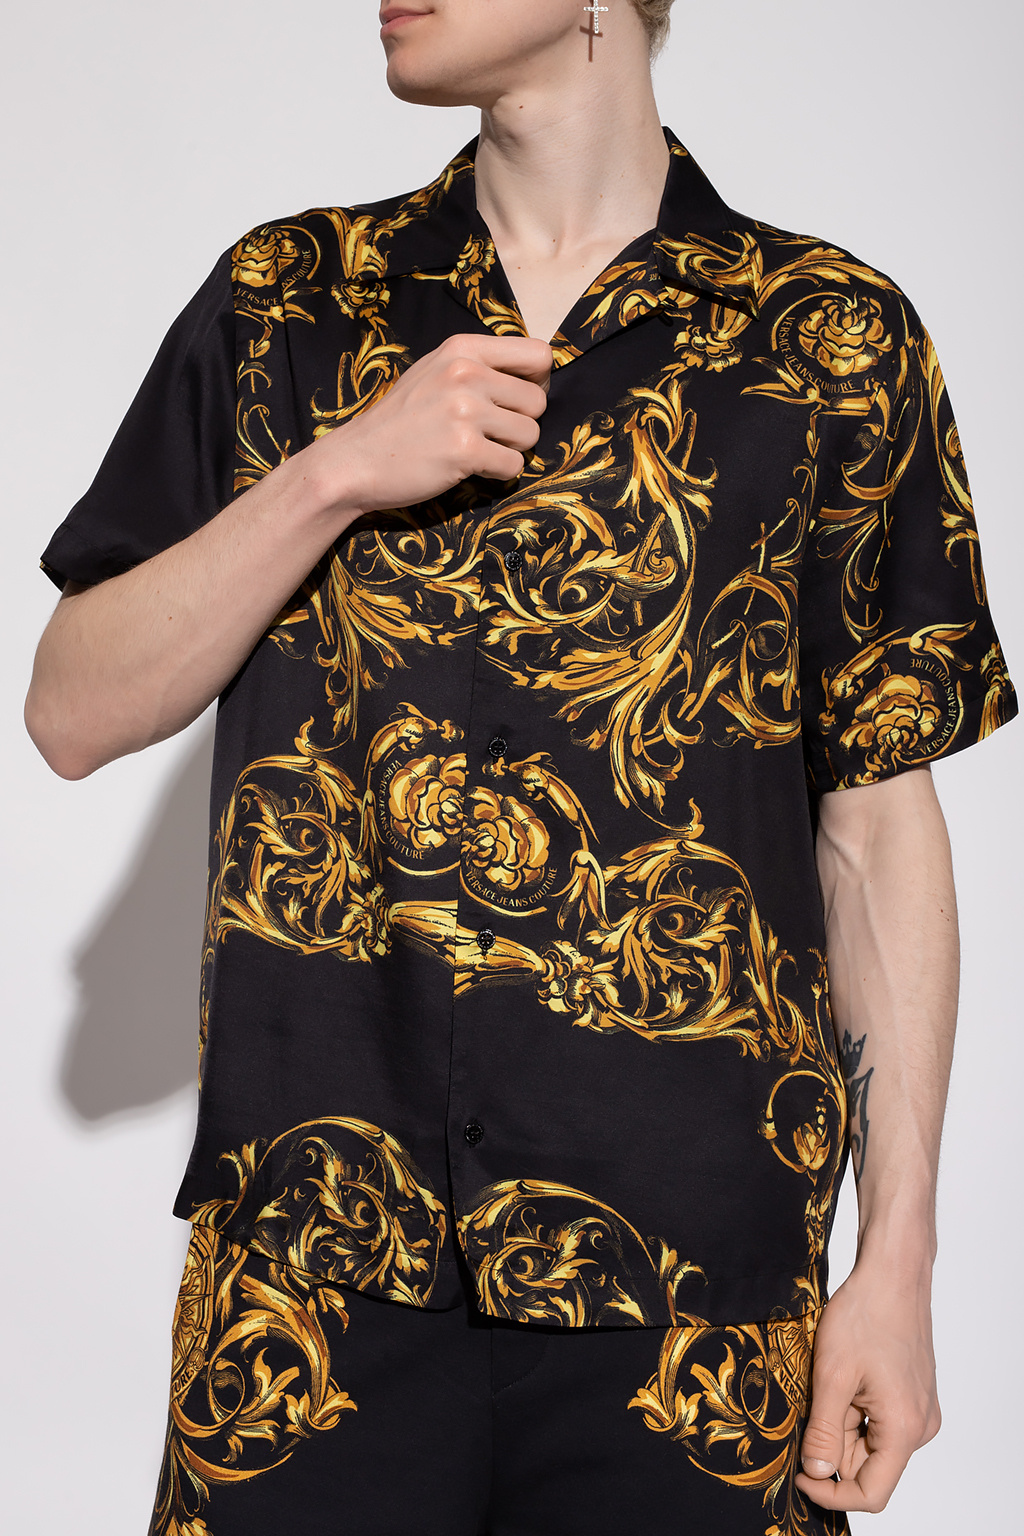 are splashed onto a T-shirt and the Patterned marinho shirt